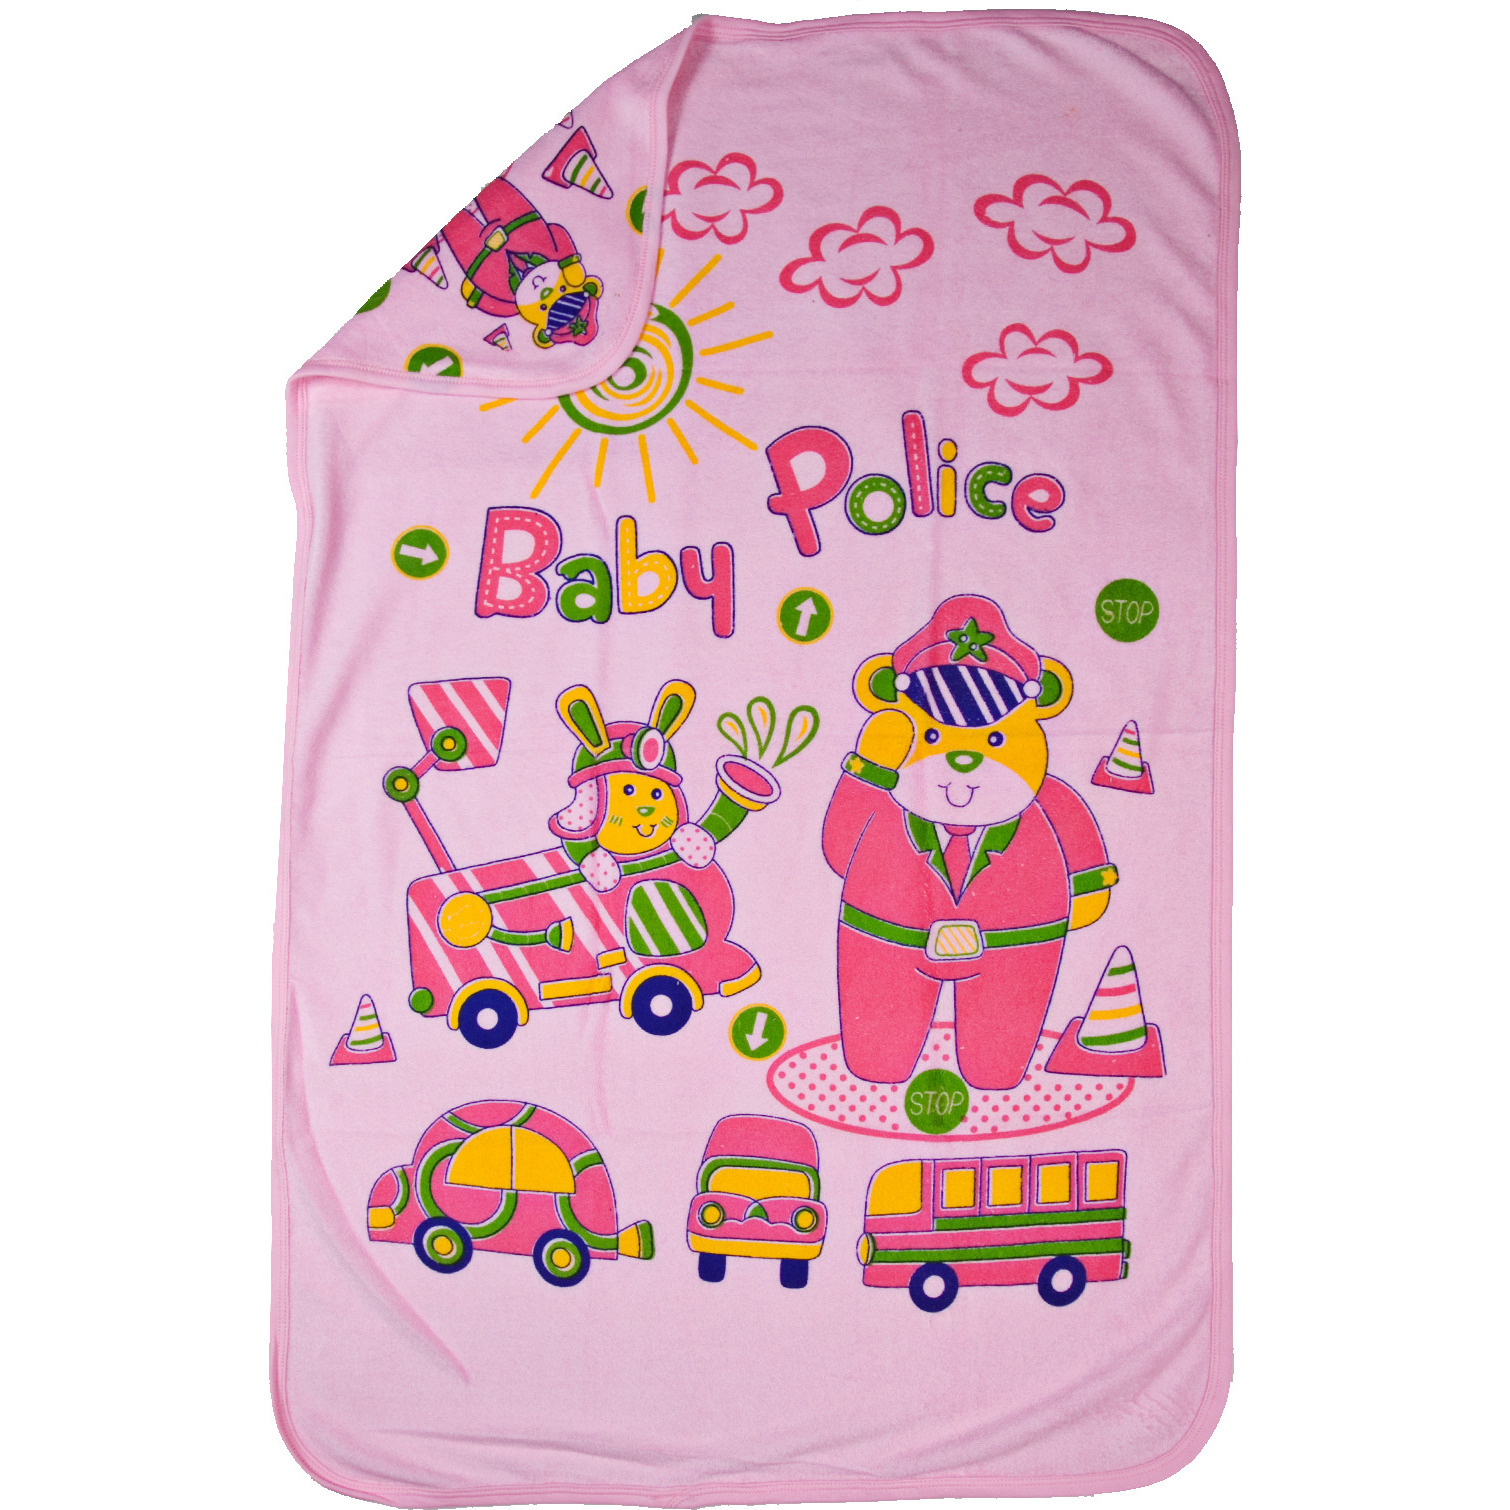 Love Baby Bath Towel Tery Super Fine Printed With Hood -1921  Pink